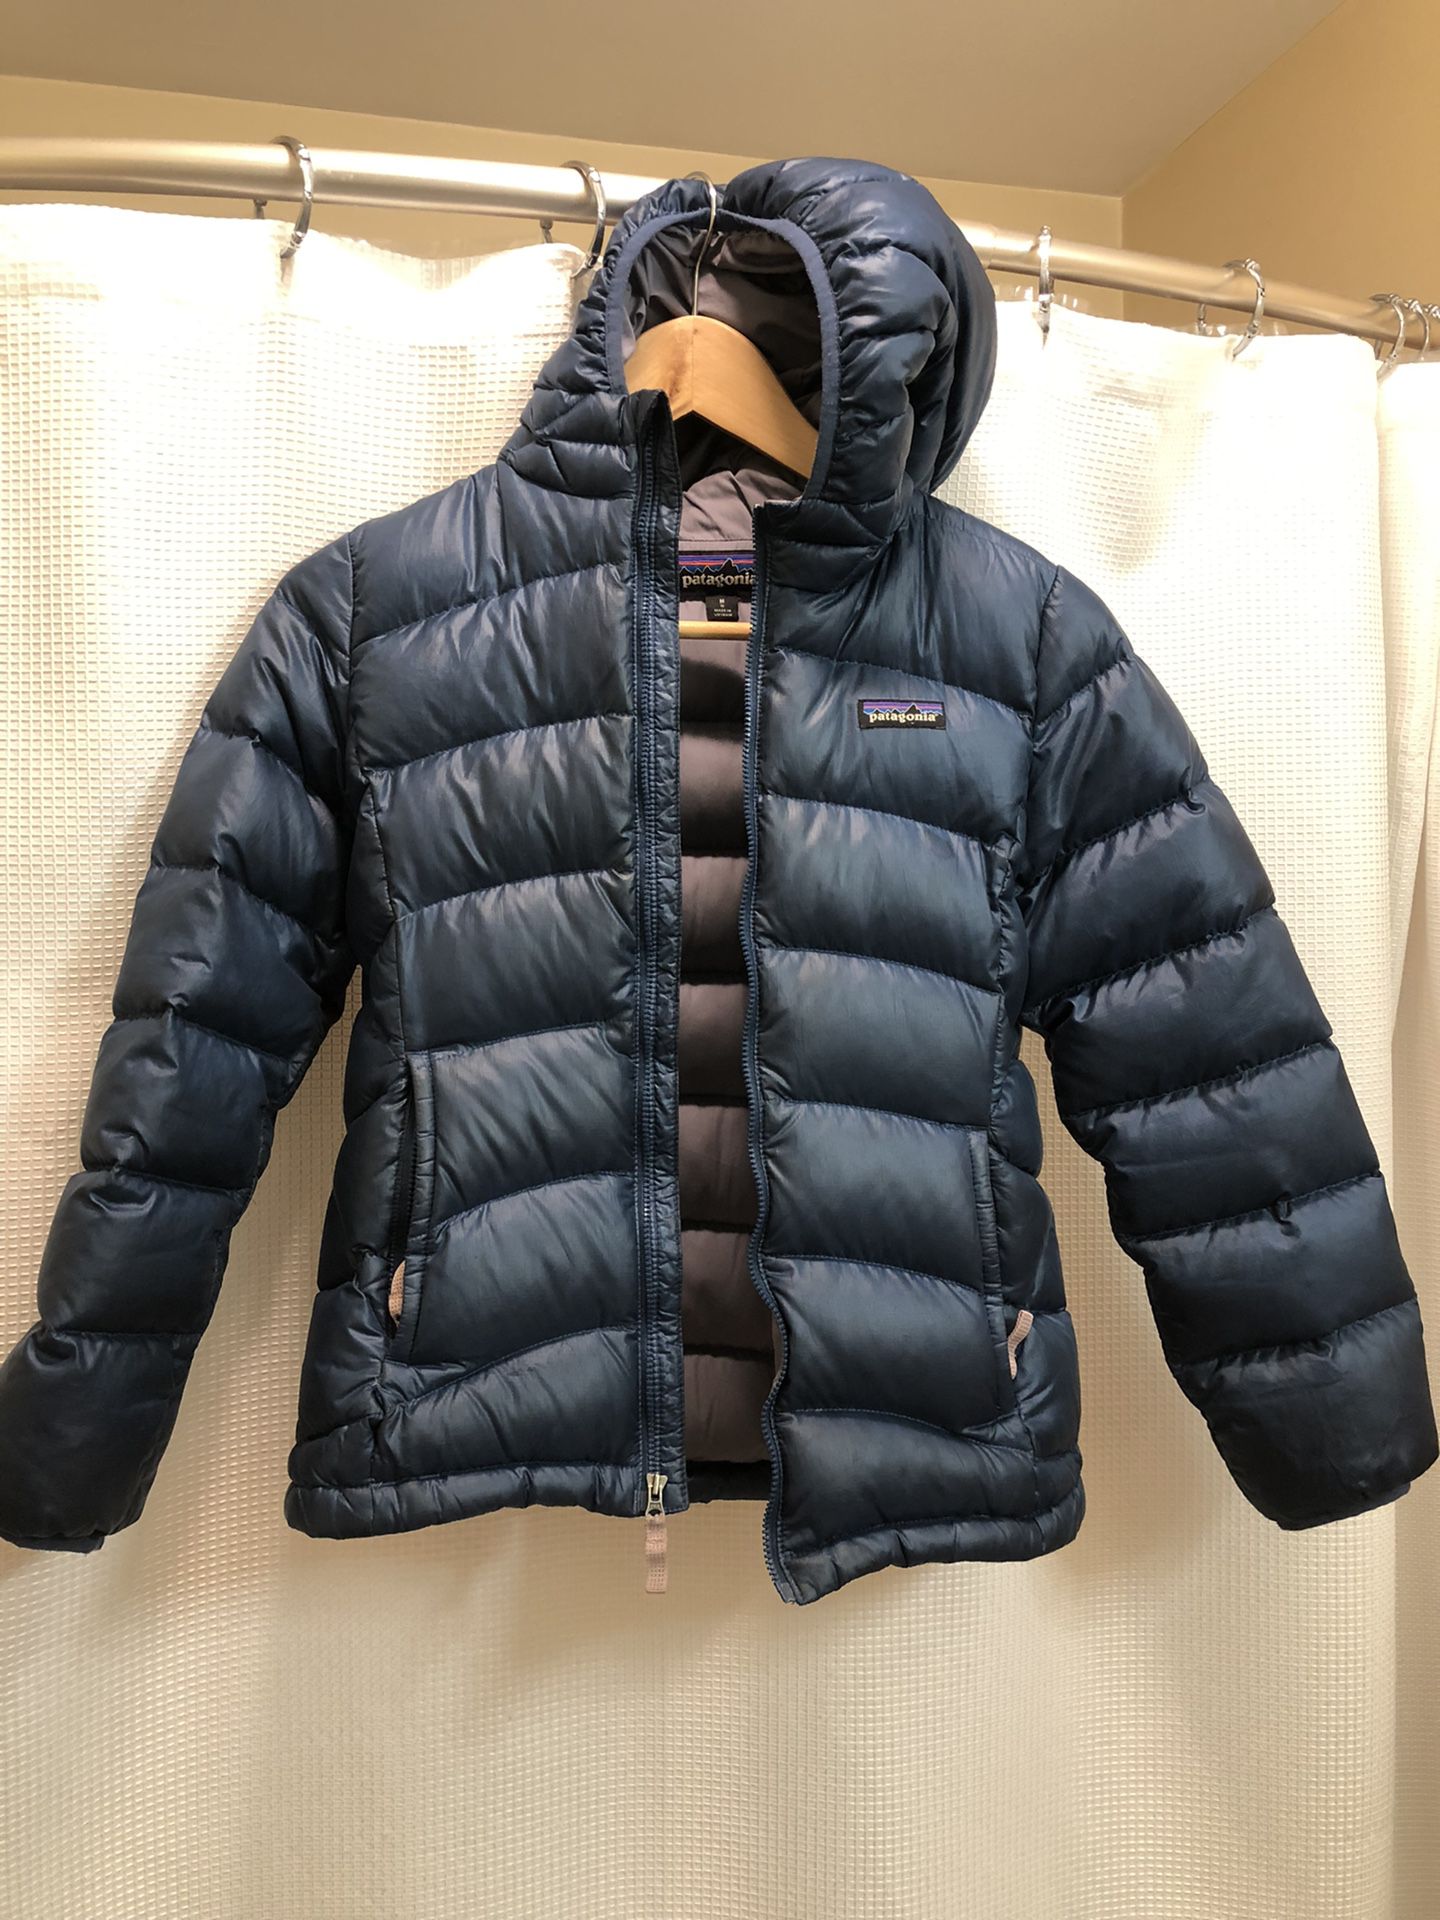 Girls Down Patagonia Coat With Good